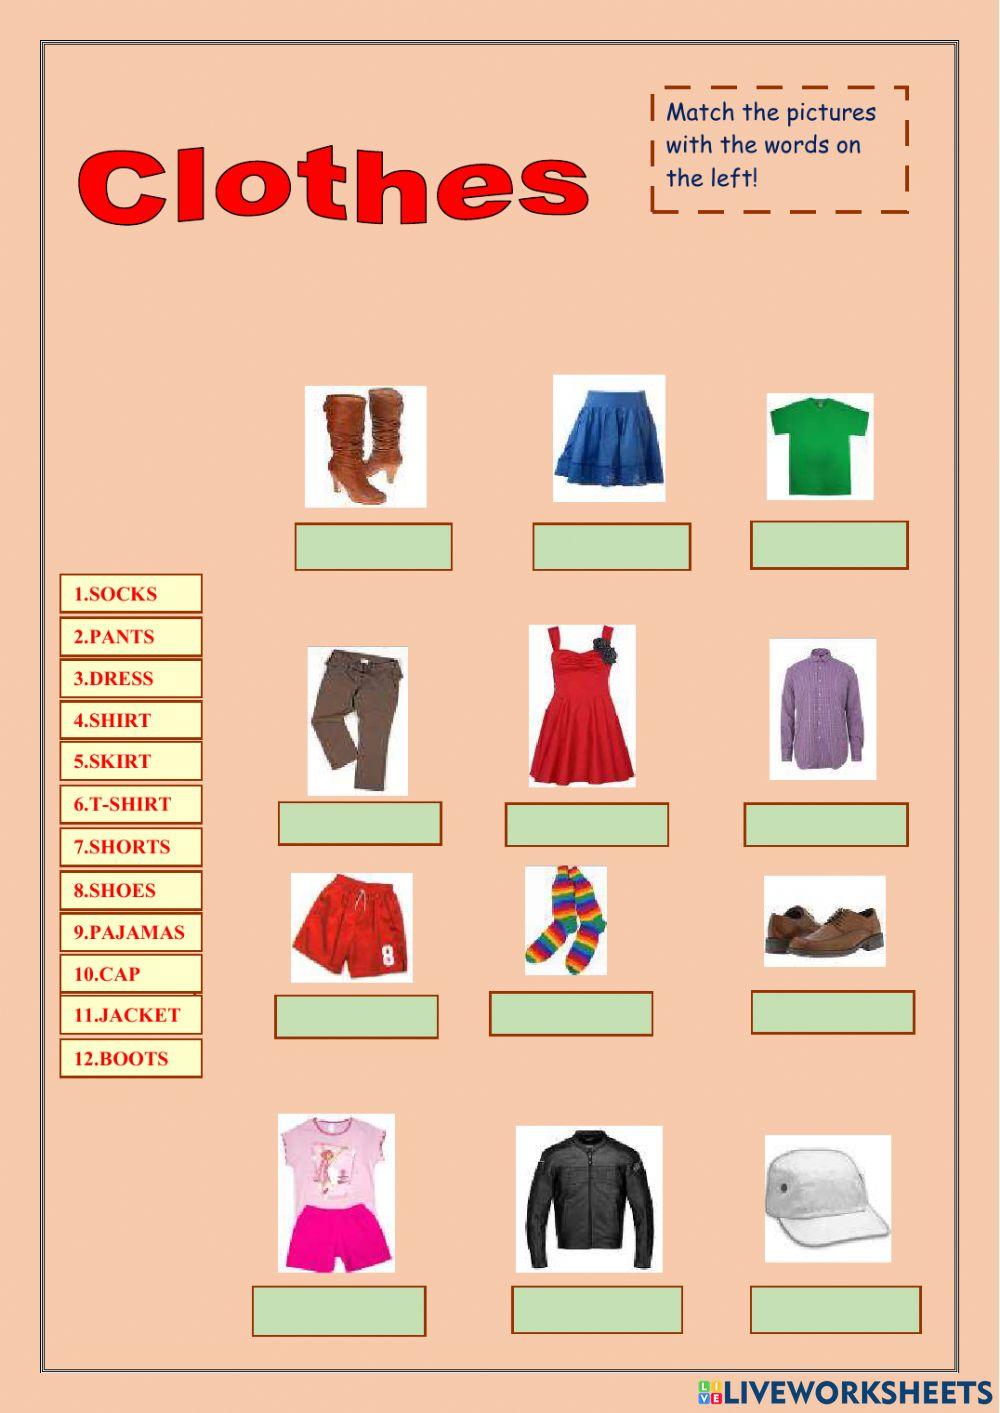 Clothes online exercise for 2 | Live Worksheets